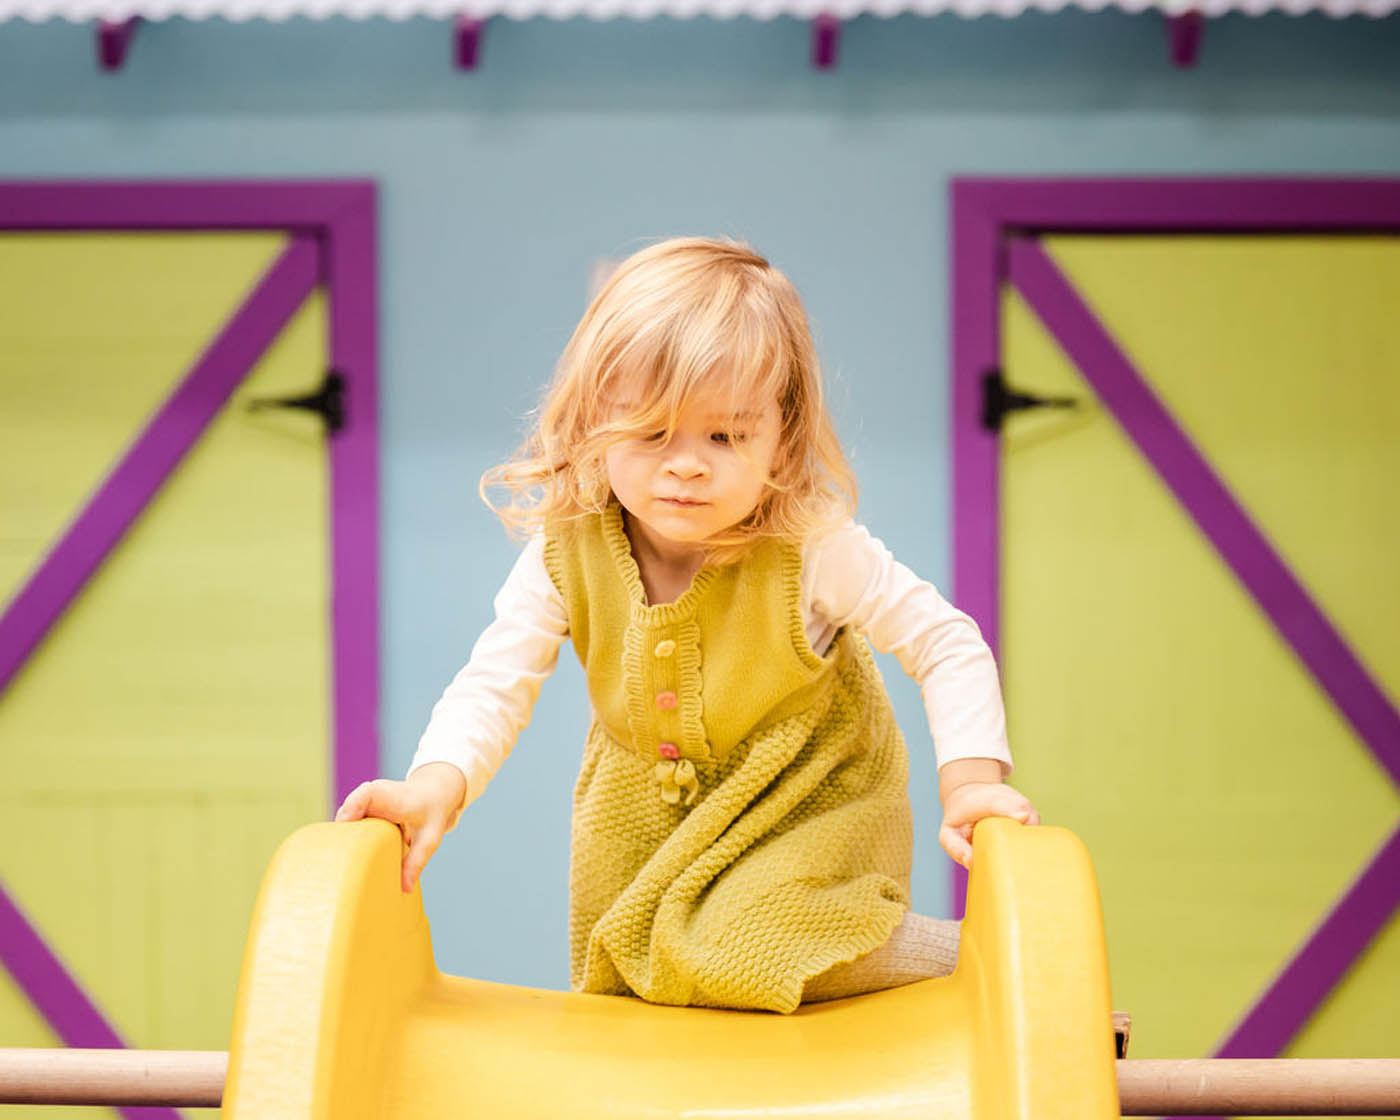 A toddler playing on a yellow slide at Romp n' Roll Pittsburgh's classes for 3 year olds in Pittsburgh, PA